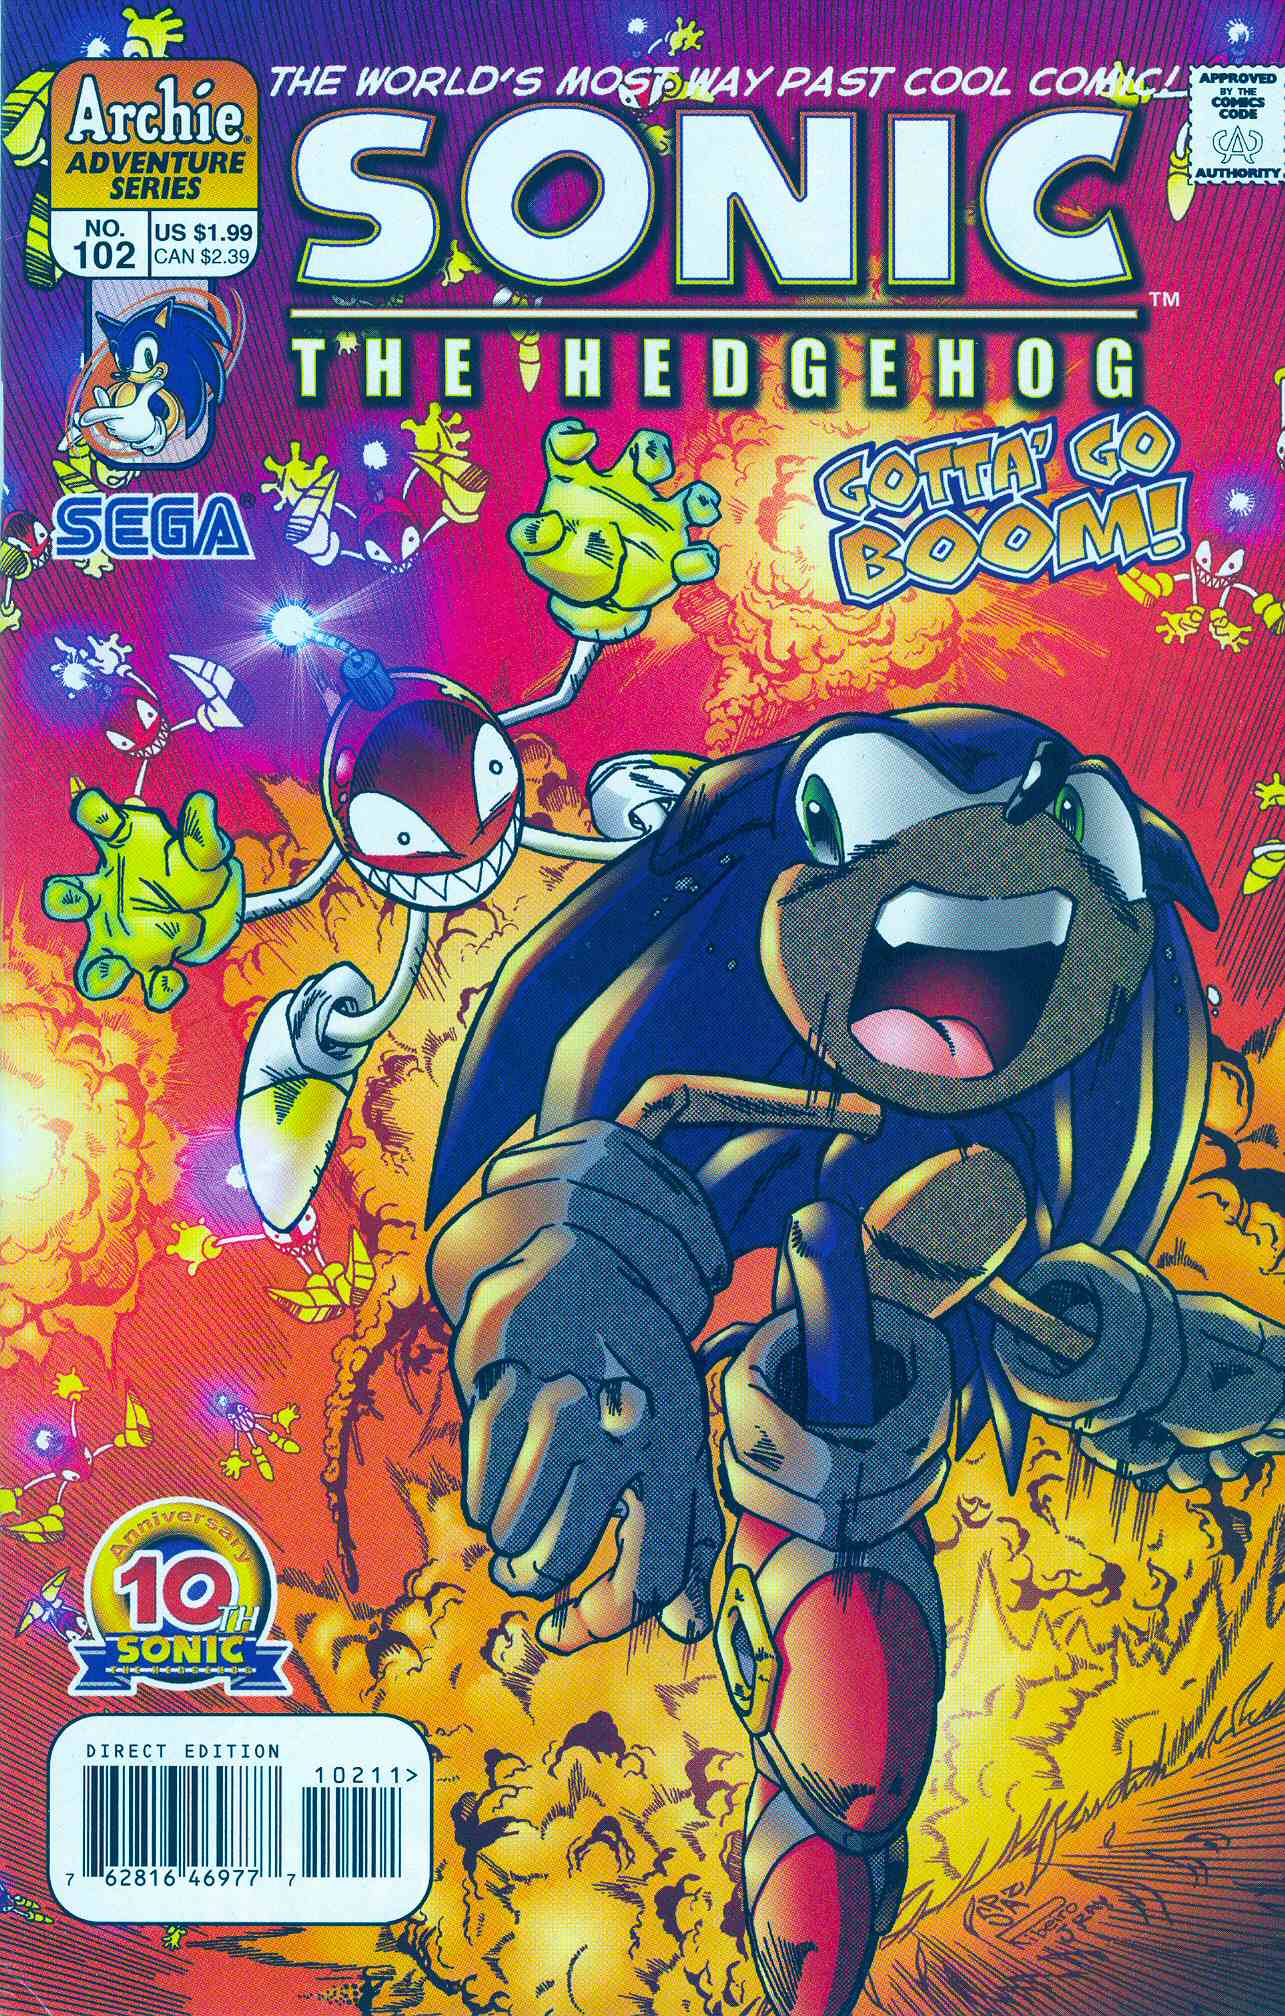 Sonic - Archie Adventure Series December 2001 Cover Page